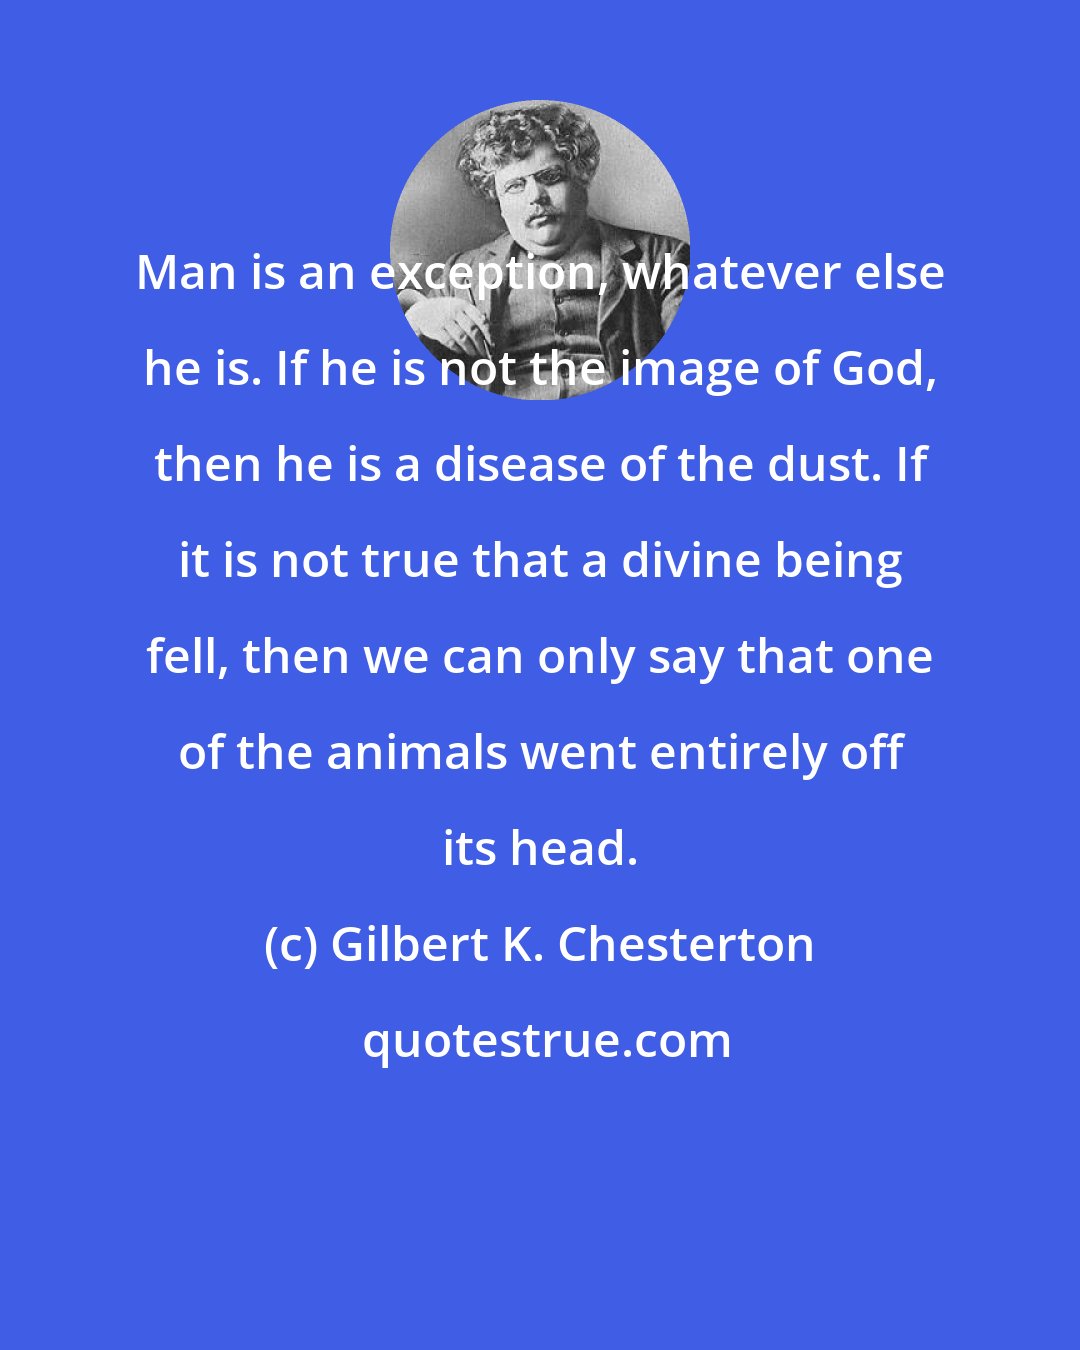 Gilbert K. Chesterton: Man is an exception, whatever else he is. If he is not the image of God, then he is a disease of the dust. If it is not true that a divine being fell, then we can only say that one of the animals went entirely off its head.